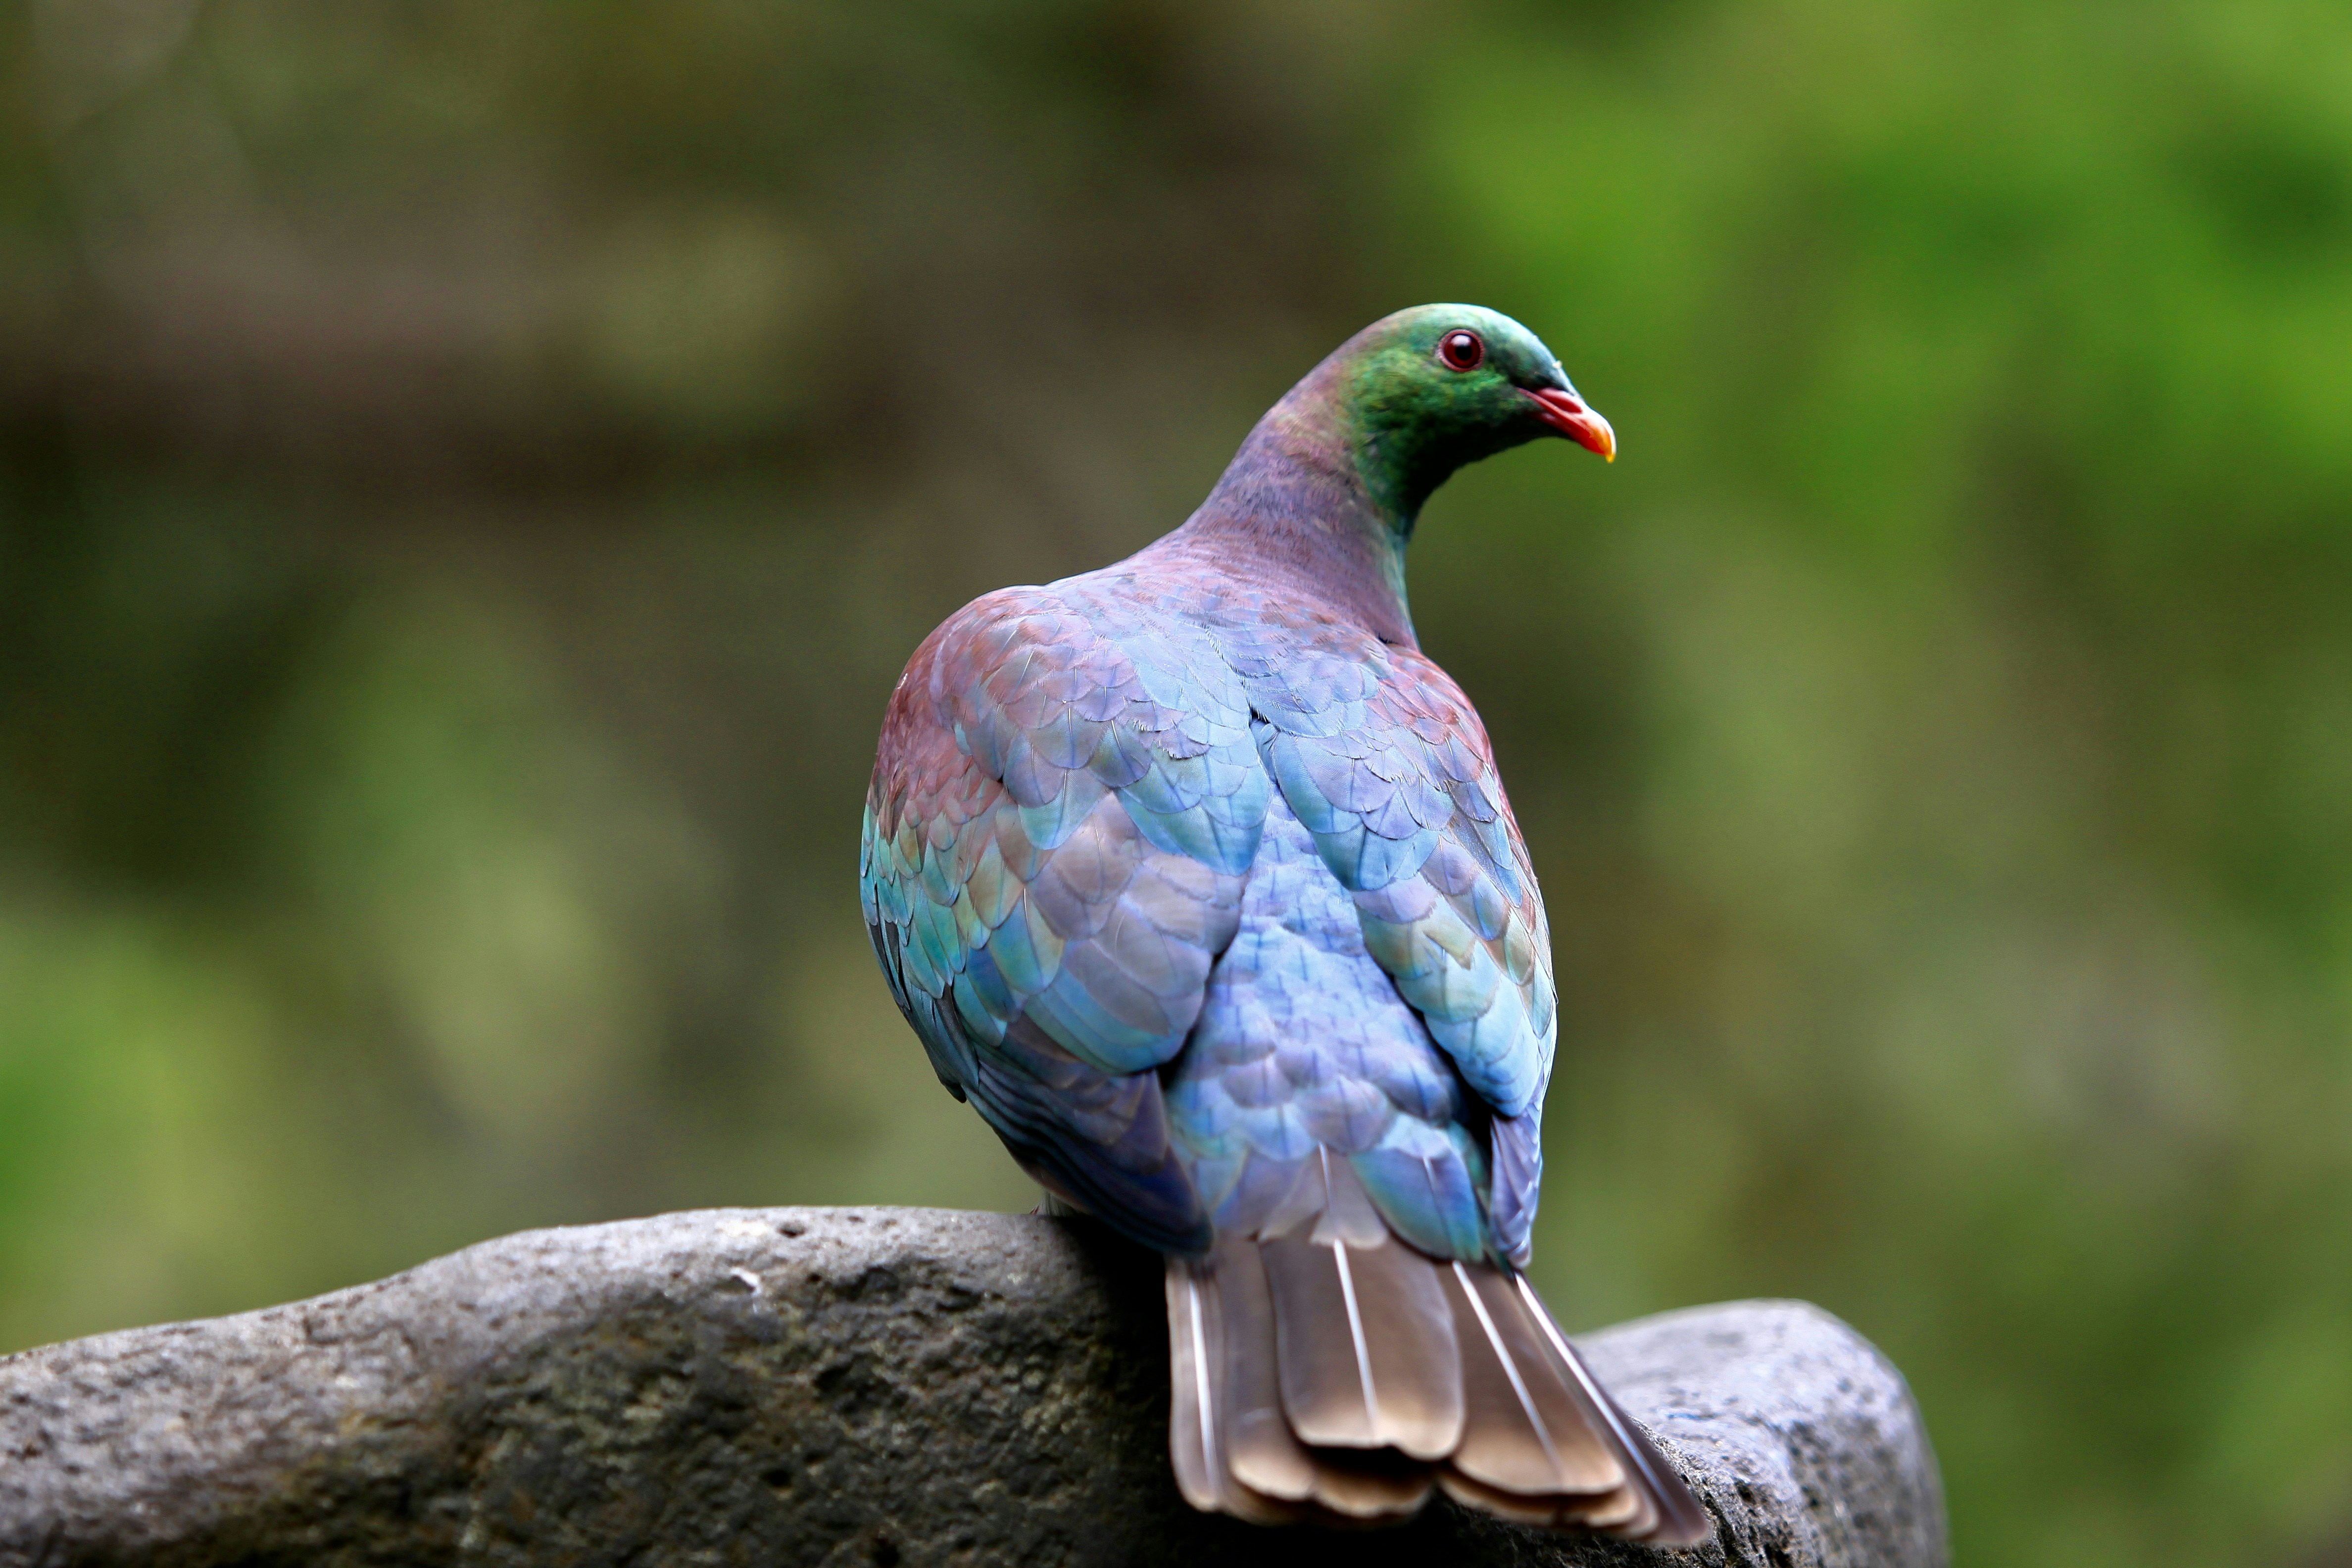 New Zealand pigeon or kererū. Spotted at the Wellington Botanical Gardens.